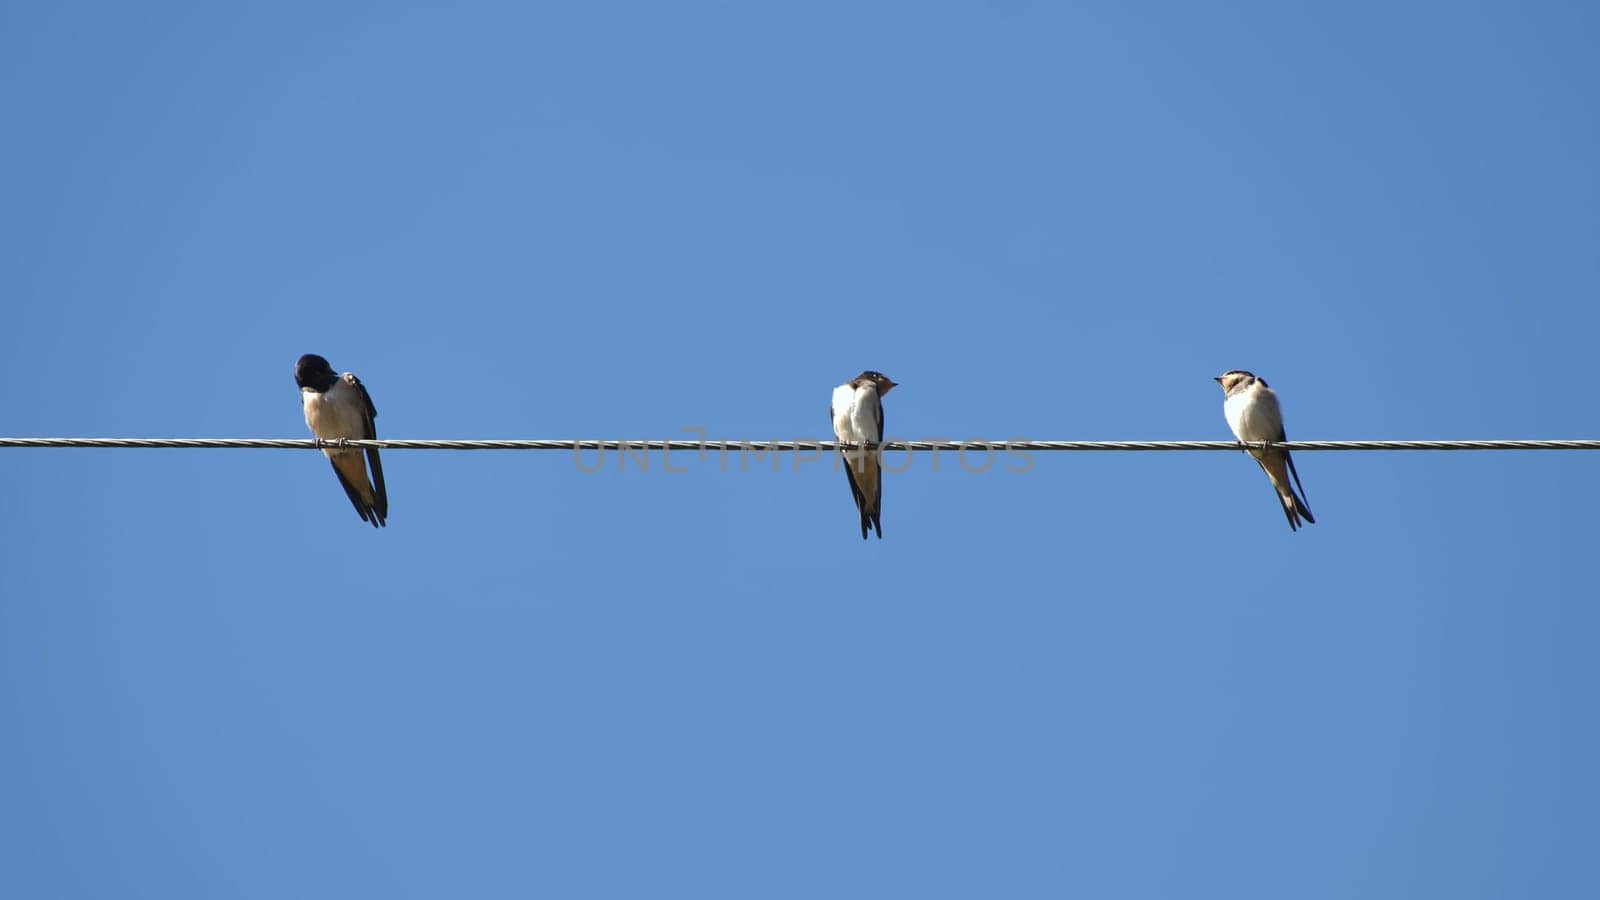 Village swallows sit on power lines in the summer. by DovidPro